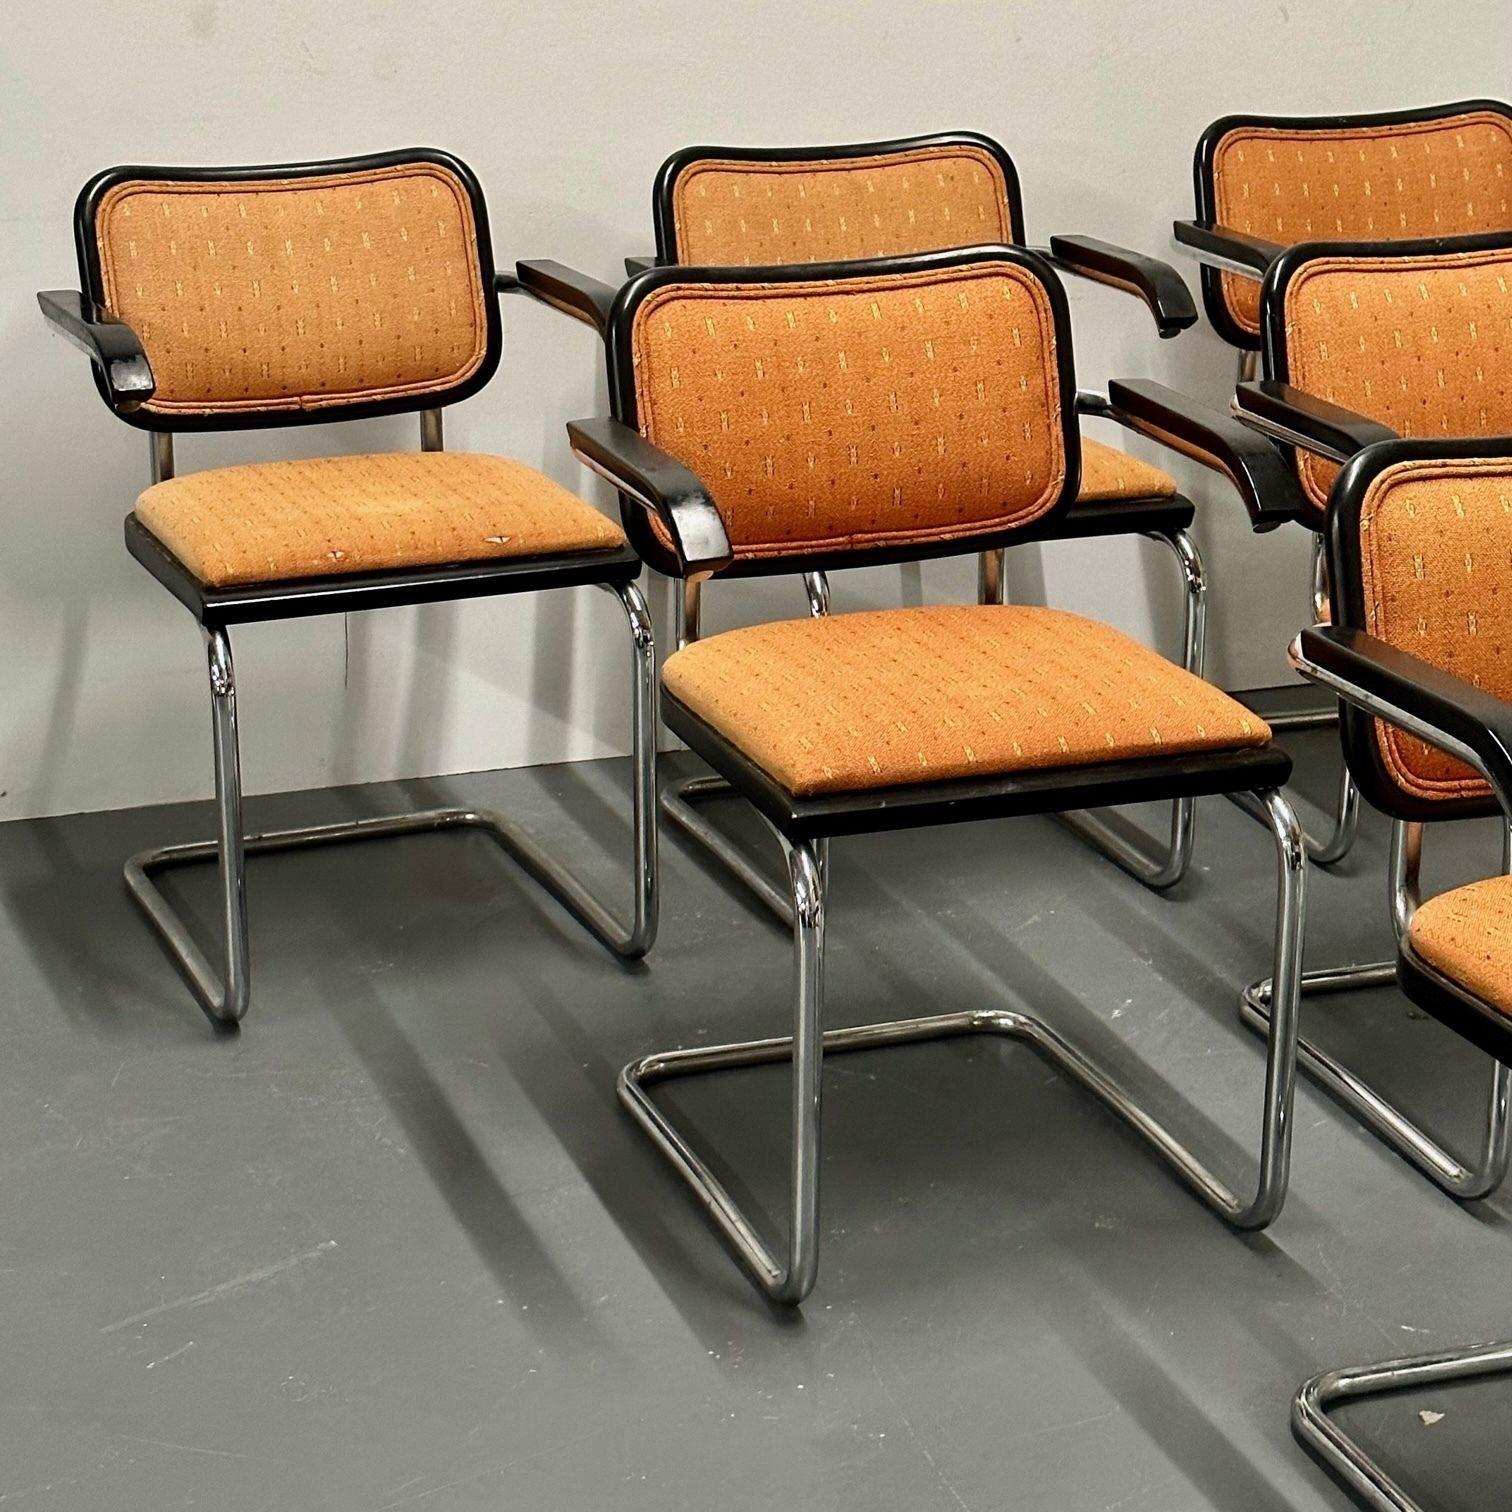 Steel Six Mid-Century Modern Marcel Breuer for Knoll Cesca Chairs, Lacquer, 1960s